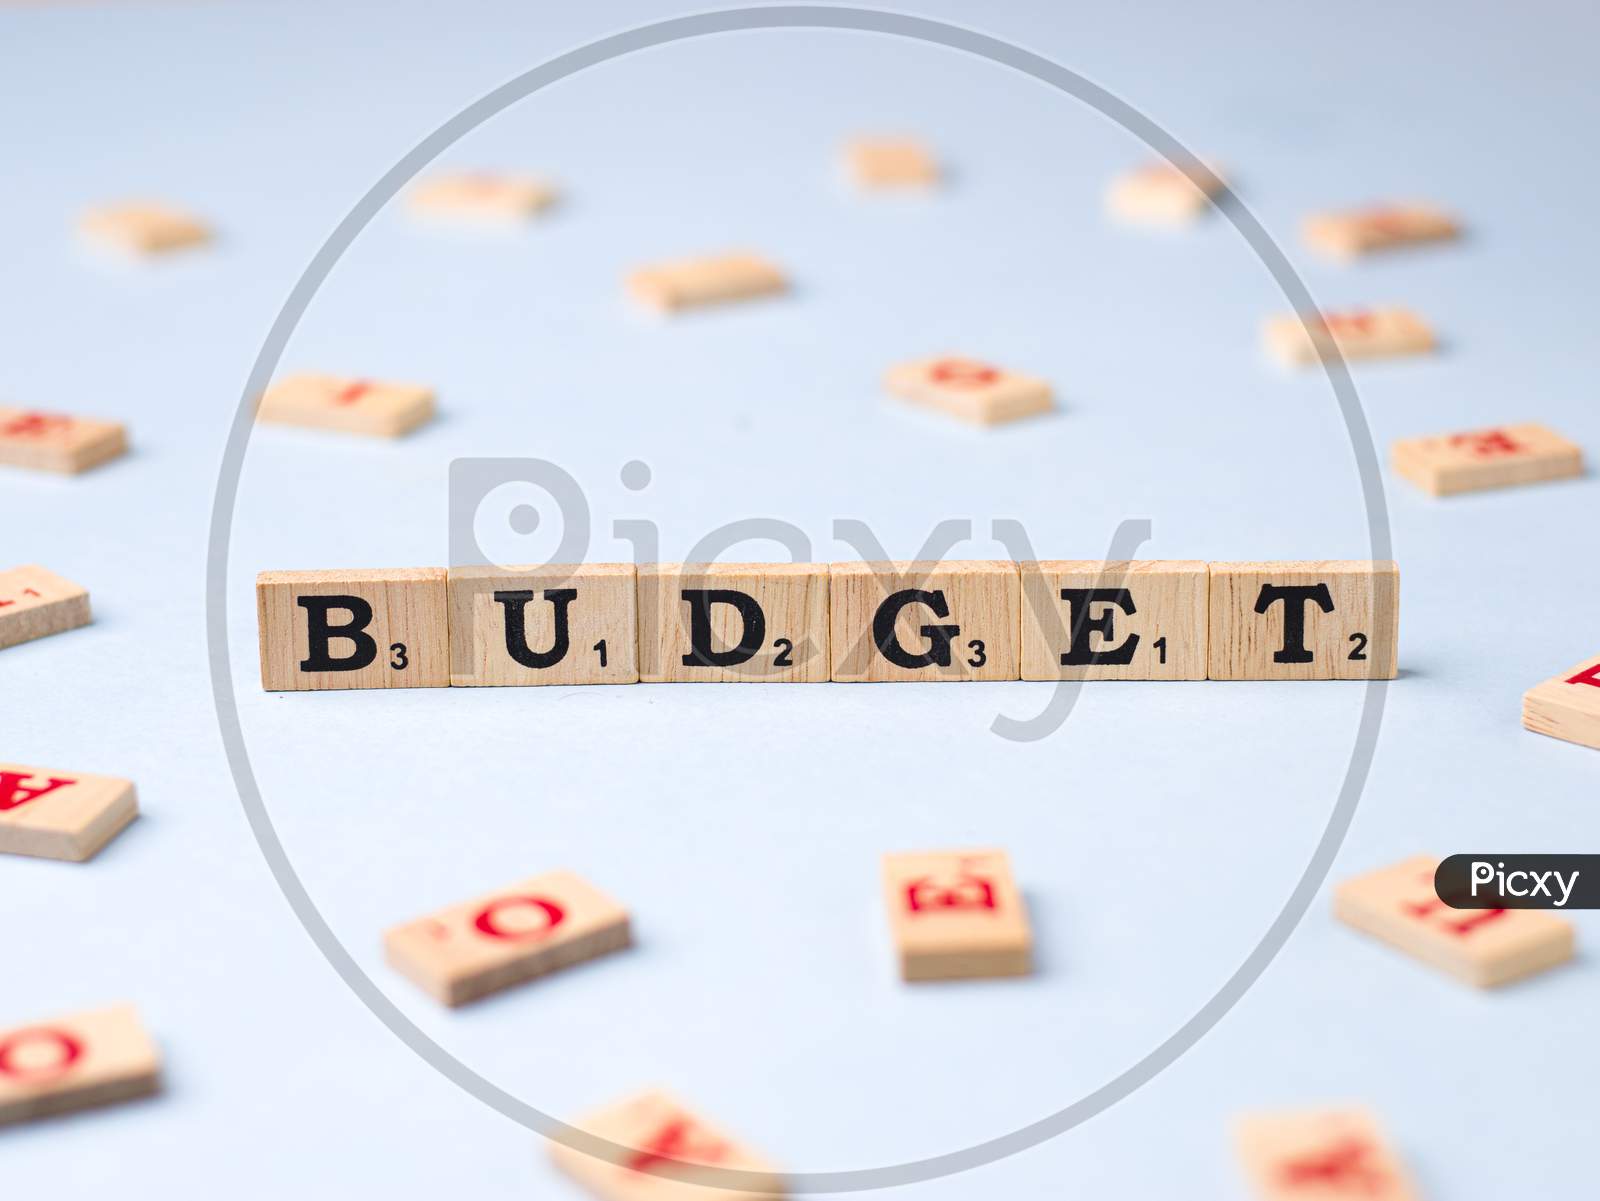 Assam, india - March 30, 2021 : Word BUDGET written on wooden cubes stock image.